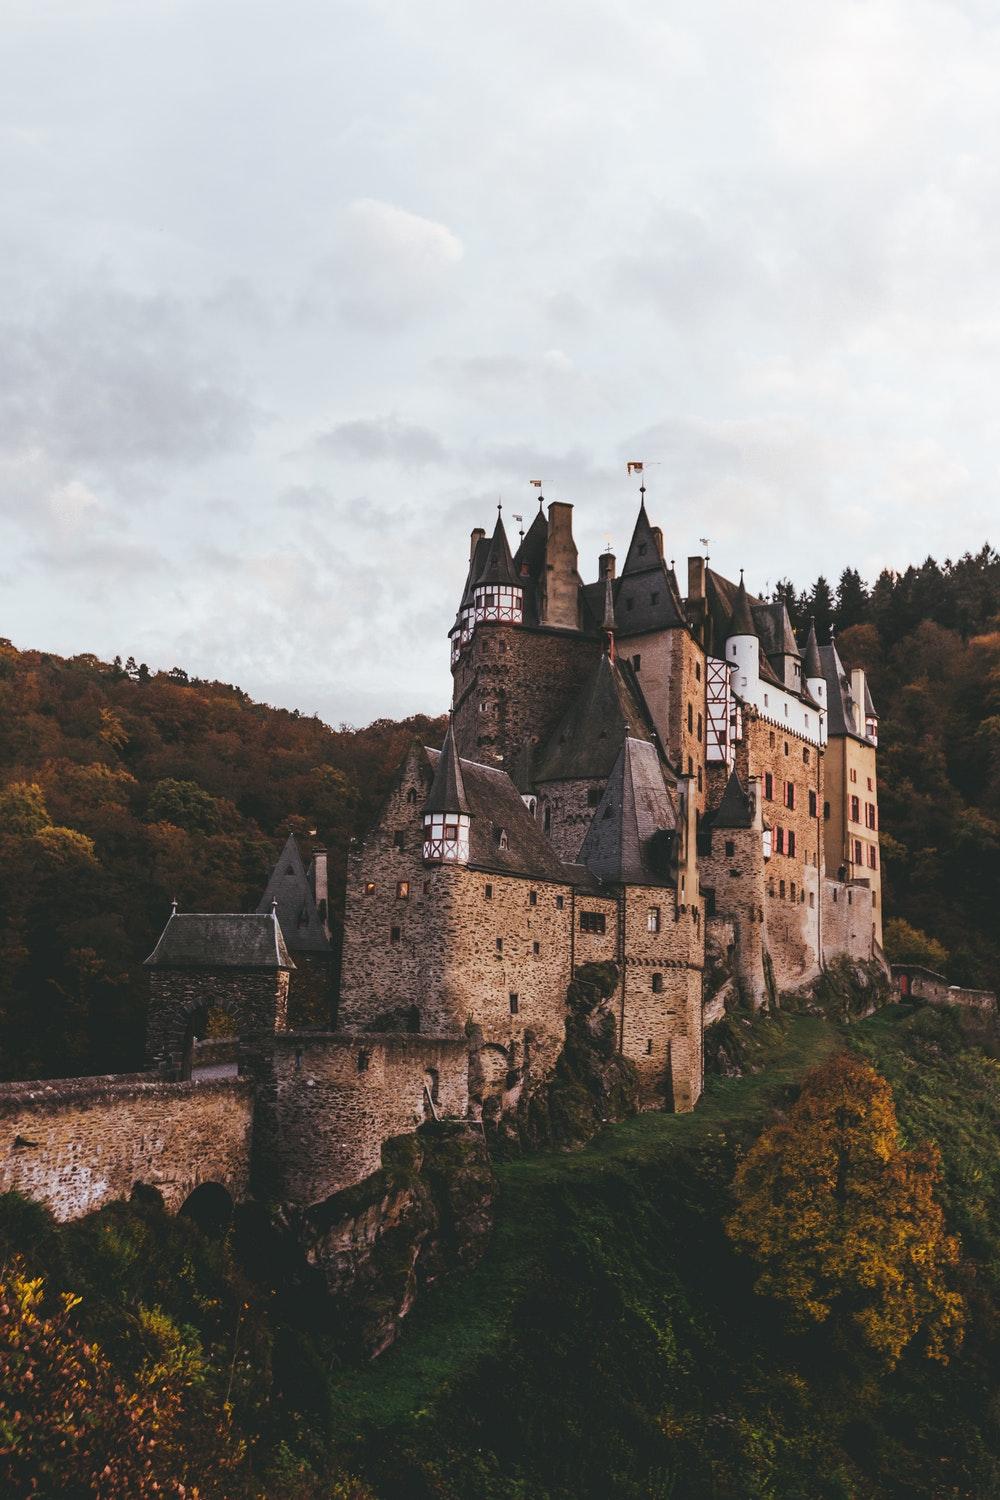 Castle Picture. Download Free Image